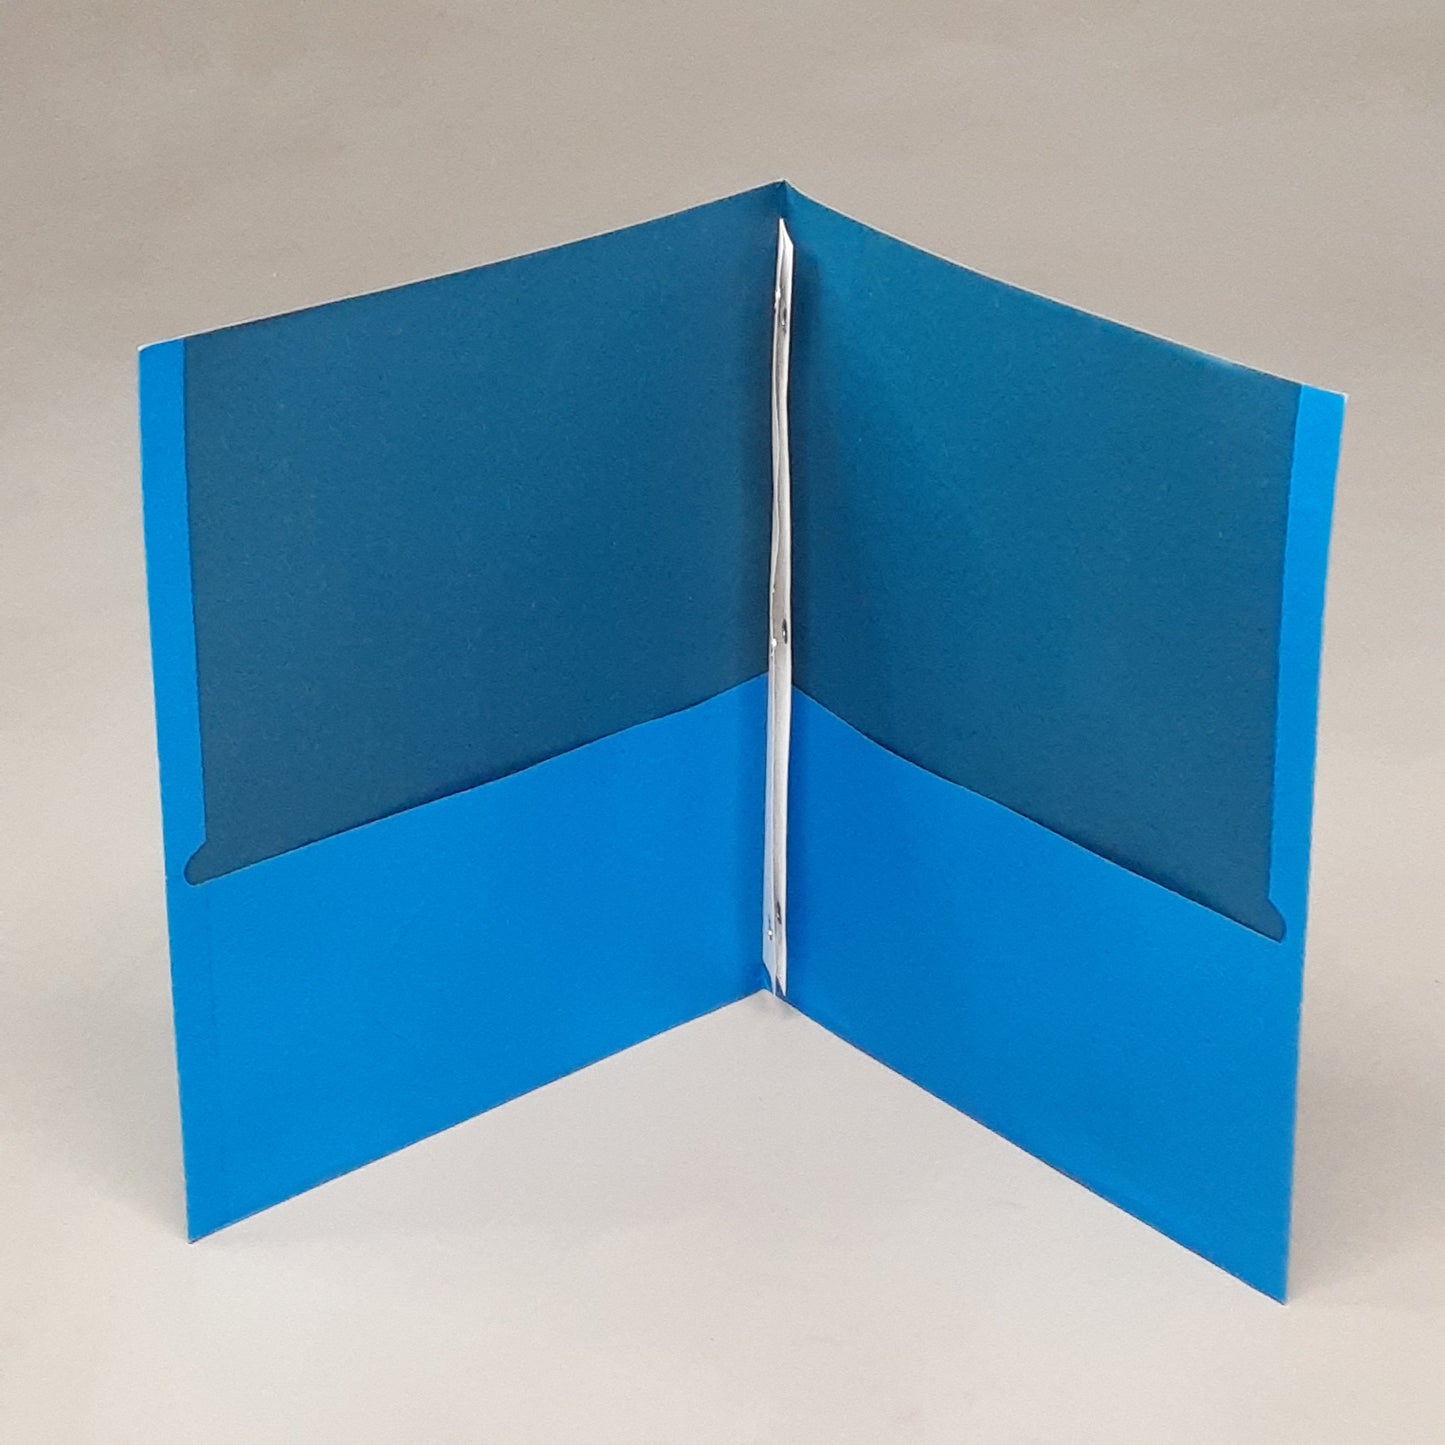 ZA@ BUSINESS SOURCE Box of 2-Pocket Folders, 100 Sheet Cap, Letter, 9-1/2" x 11" Blue BSN78507(New Other)